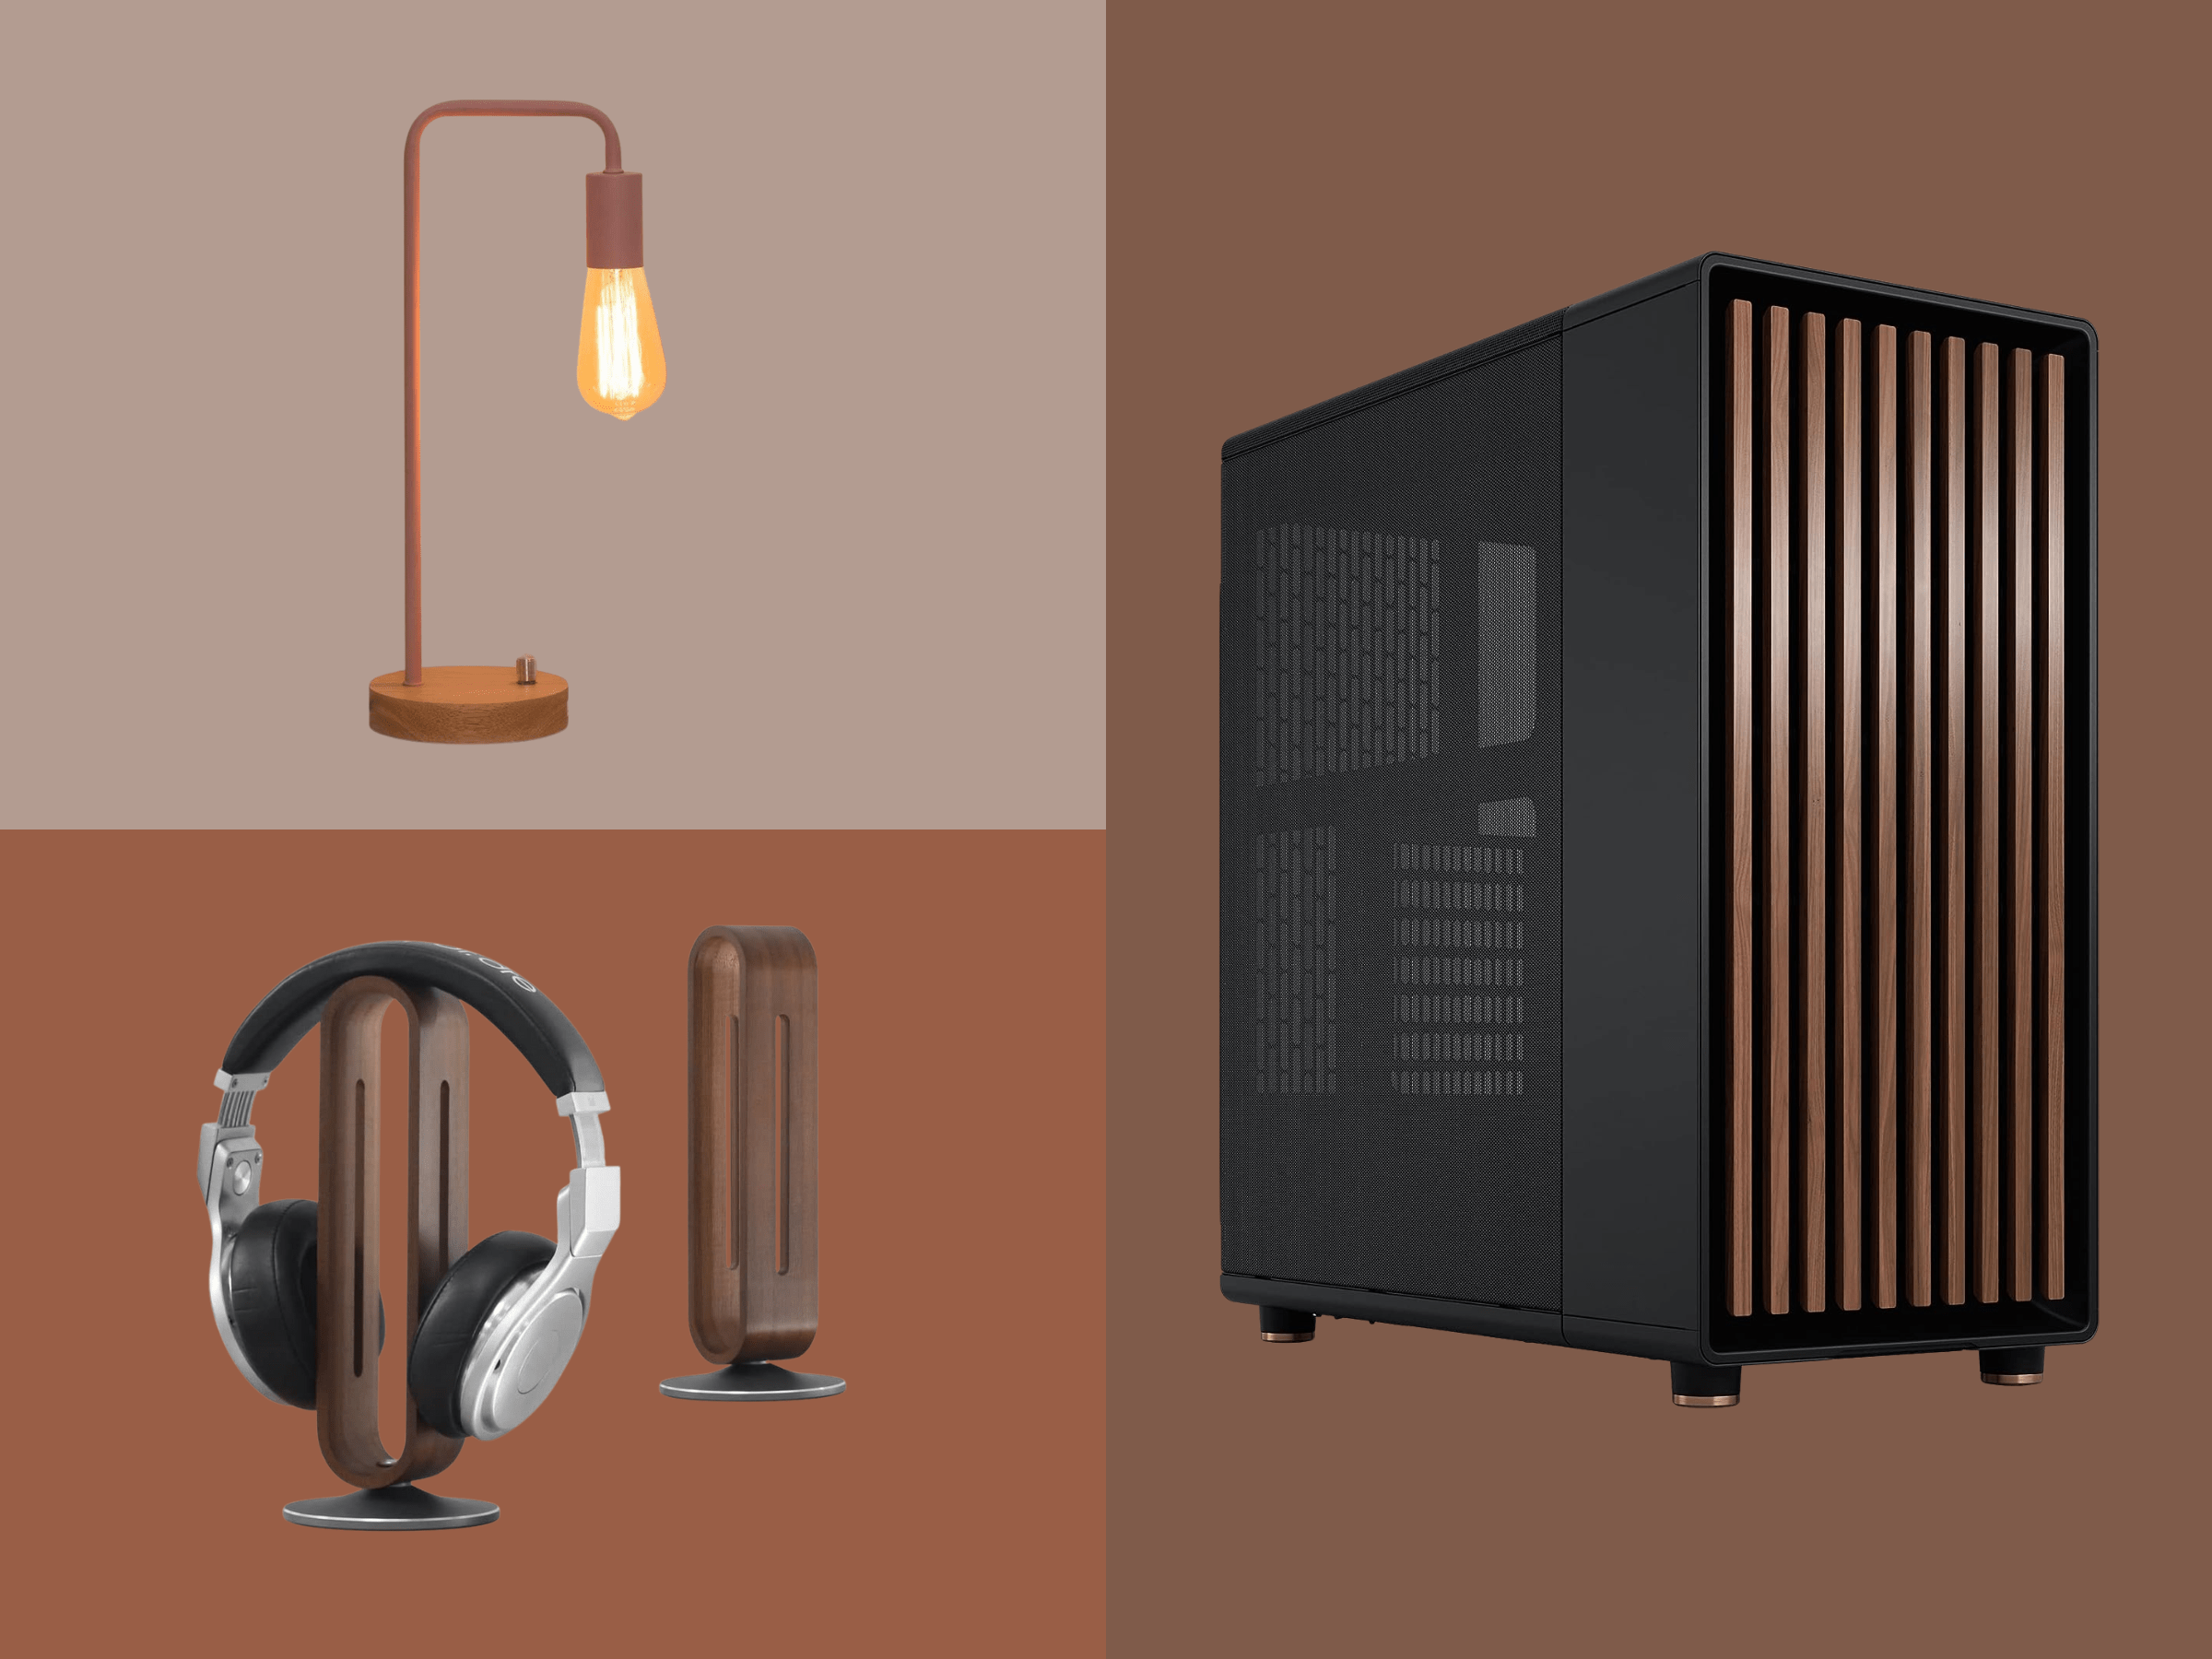 blog post featured image showcasing a lamp, pc case, and wooden headset stand